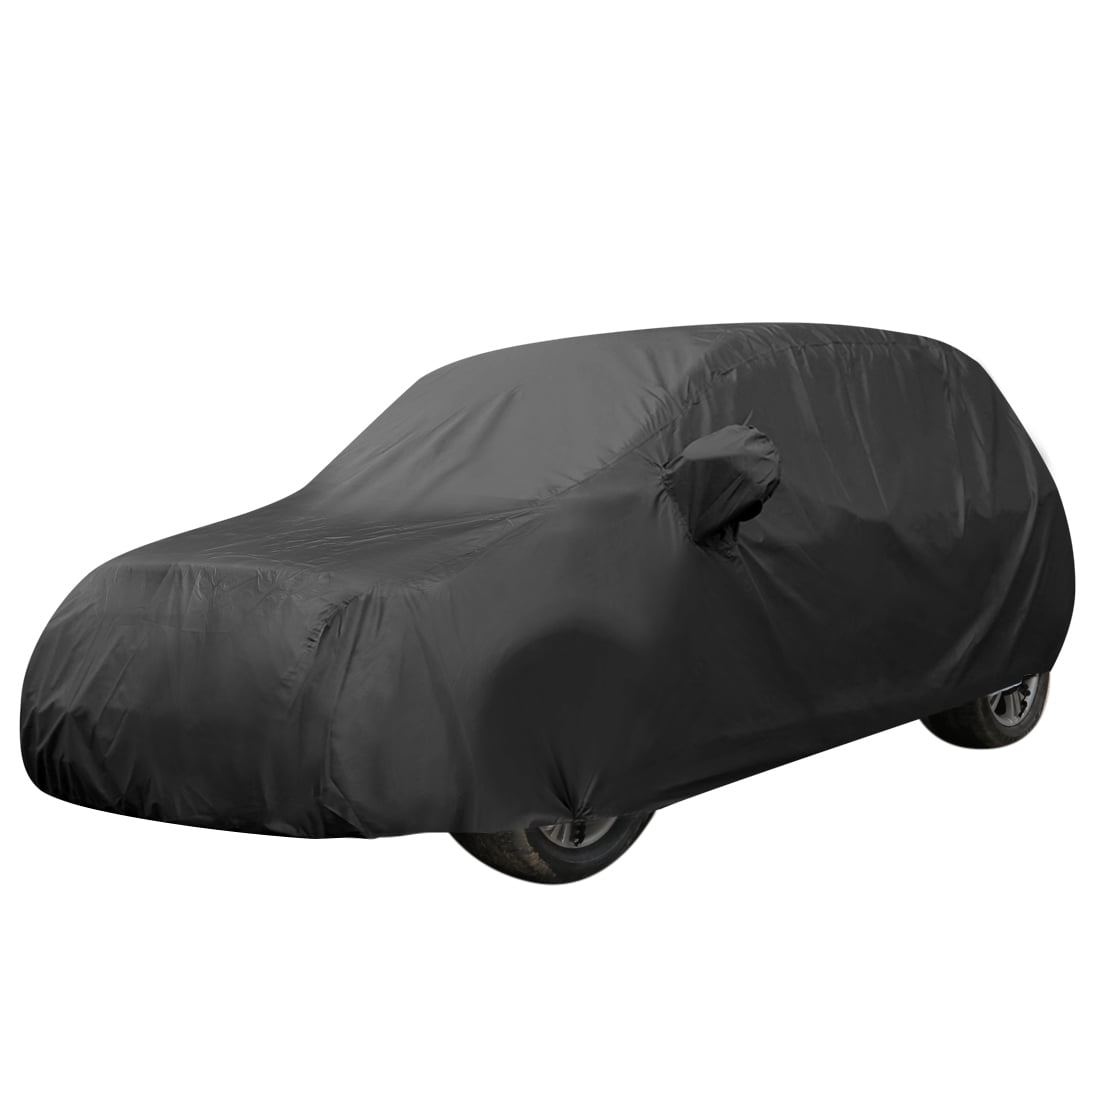 Durable Outdoor Stormproof Waterproof BreathableBlack Car Cover For Forster - image 1 of 7